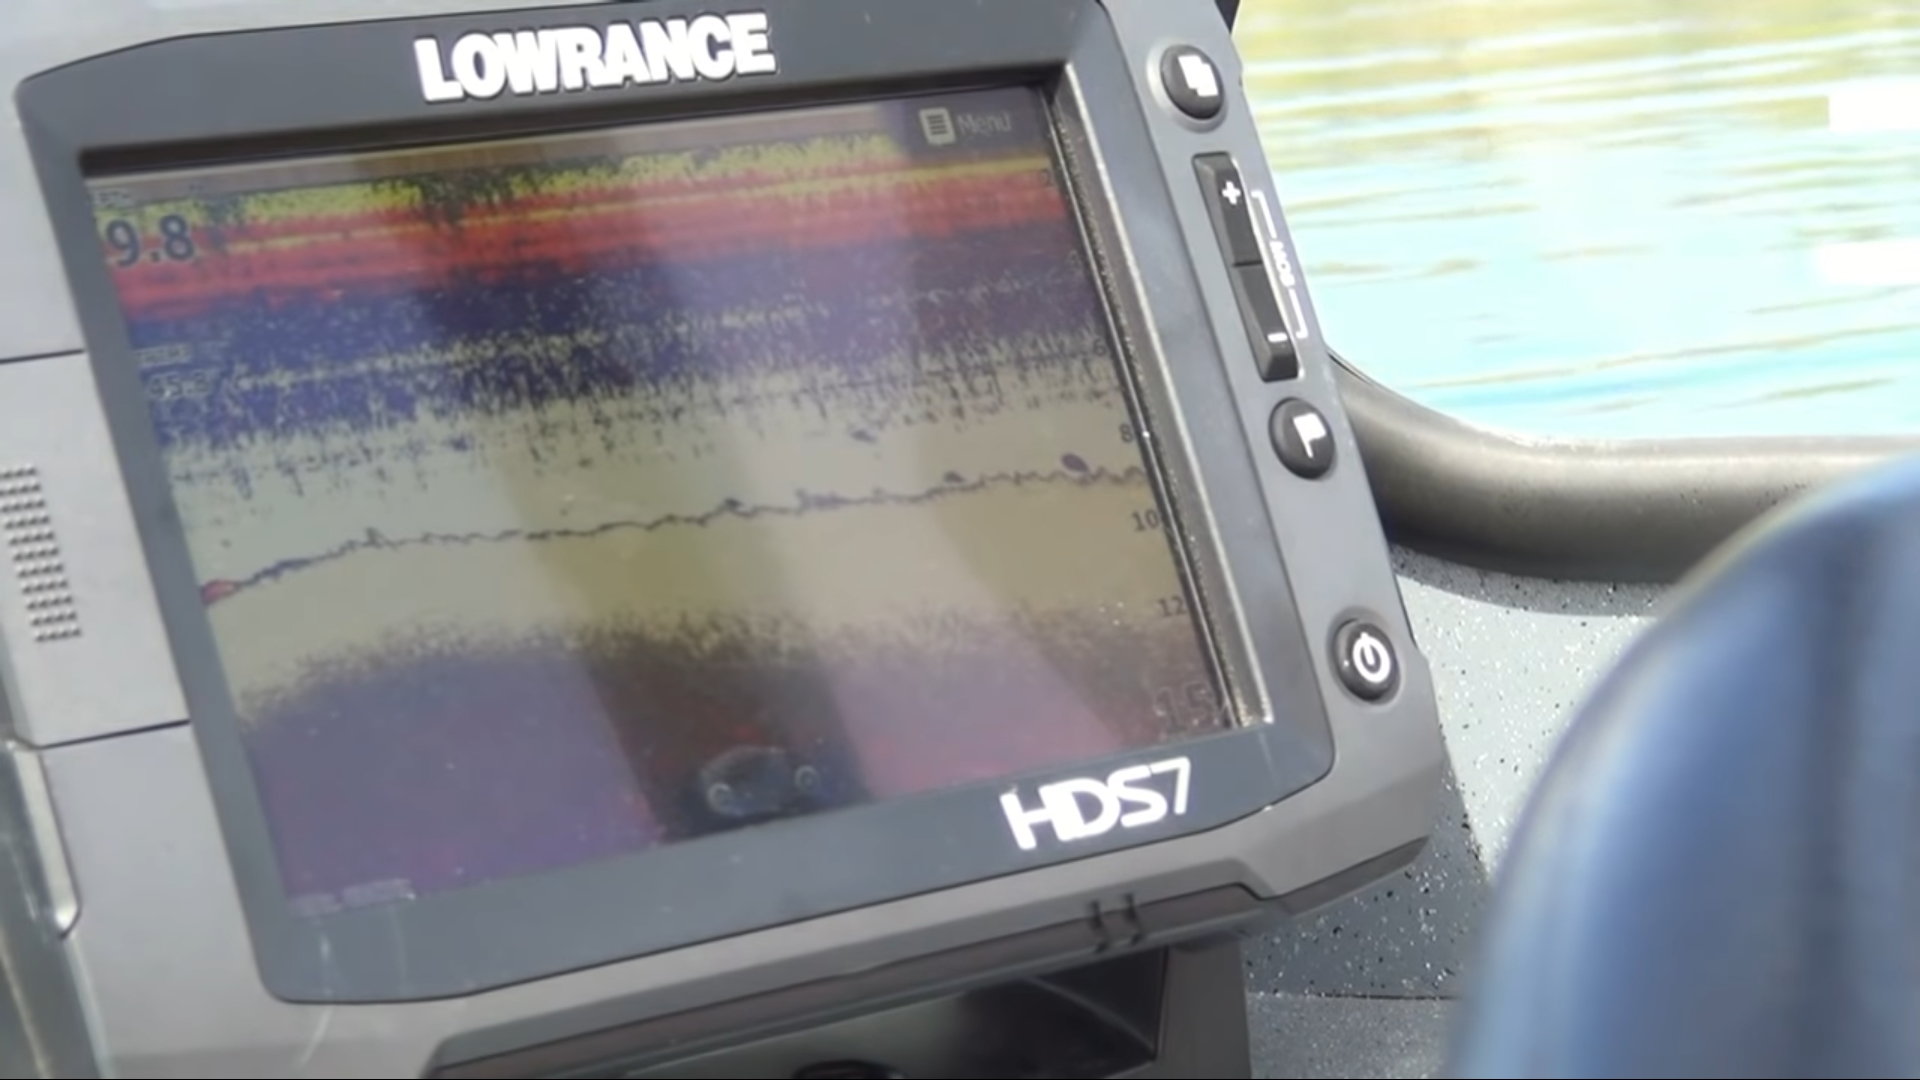 Lowrance Resolution vs Garmin - The Hull Truth - Boating and